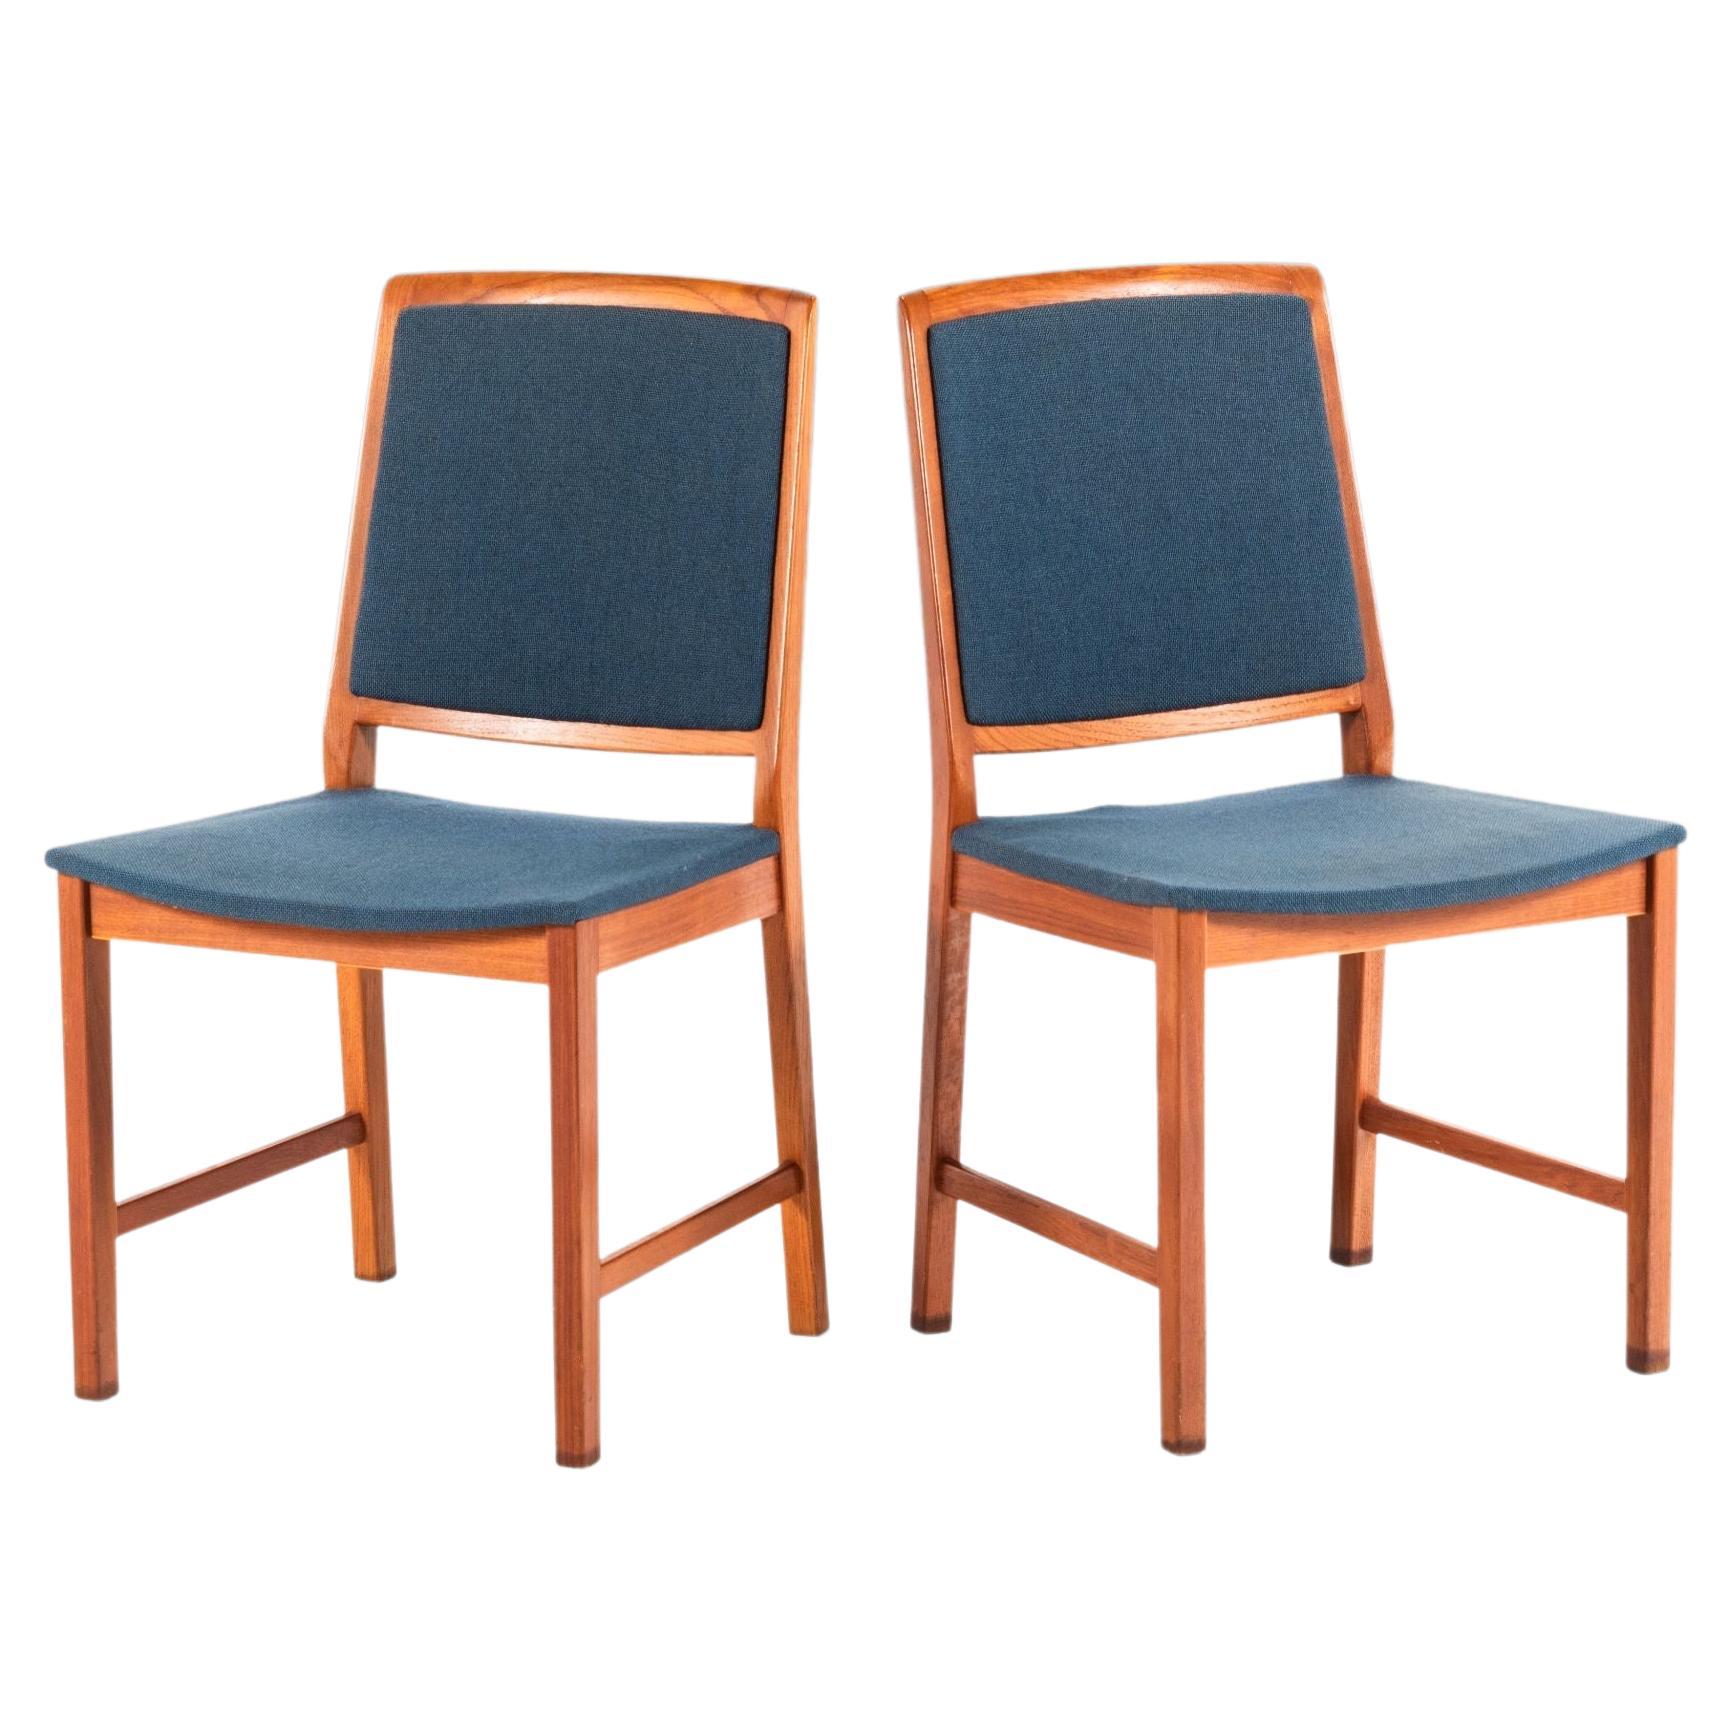 Set of 2 Side Chairs / Dining Chairs in Teak for Skaraborgs Sweden, c. 1960's